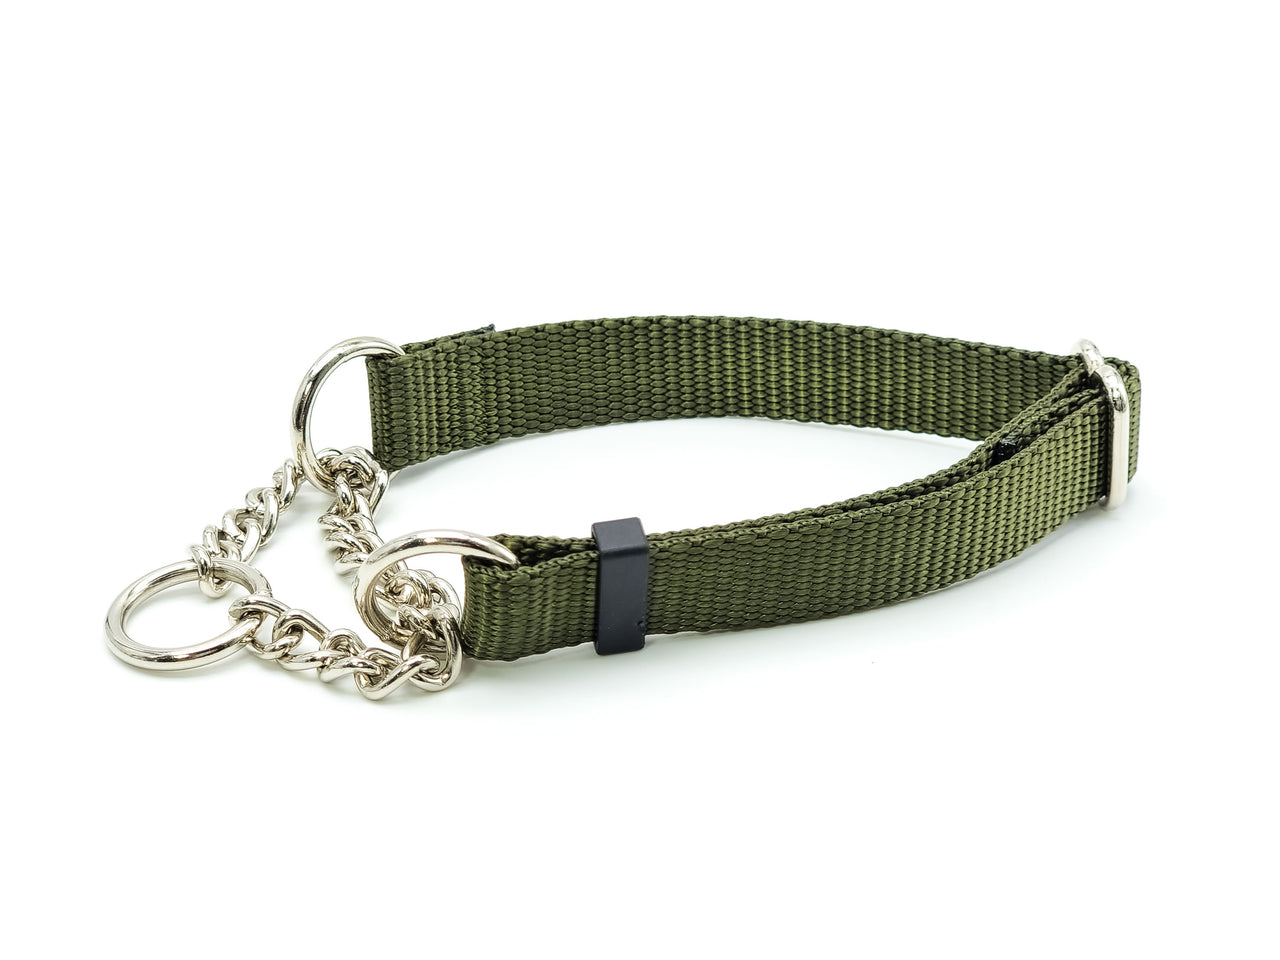 Olive Drab Chain Martingale | Medium 12"-17" in 3/4" wide